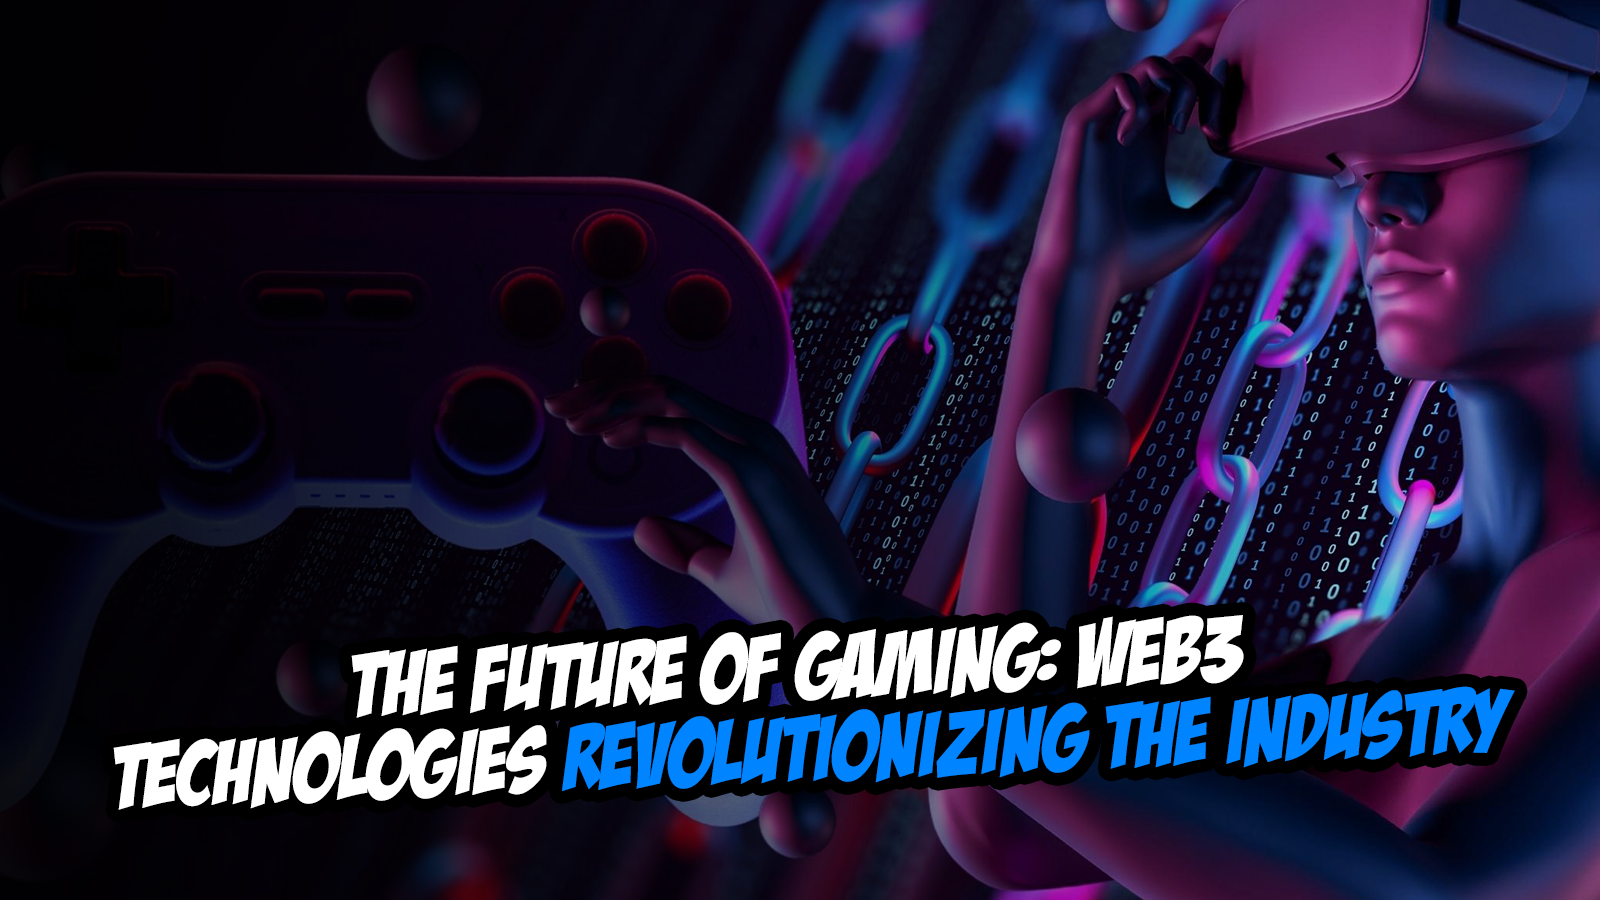 The Future of Gaming: Web3 Technologies Revolutionizing the Industry